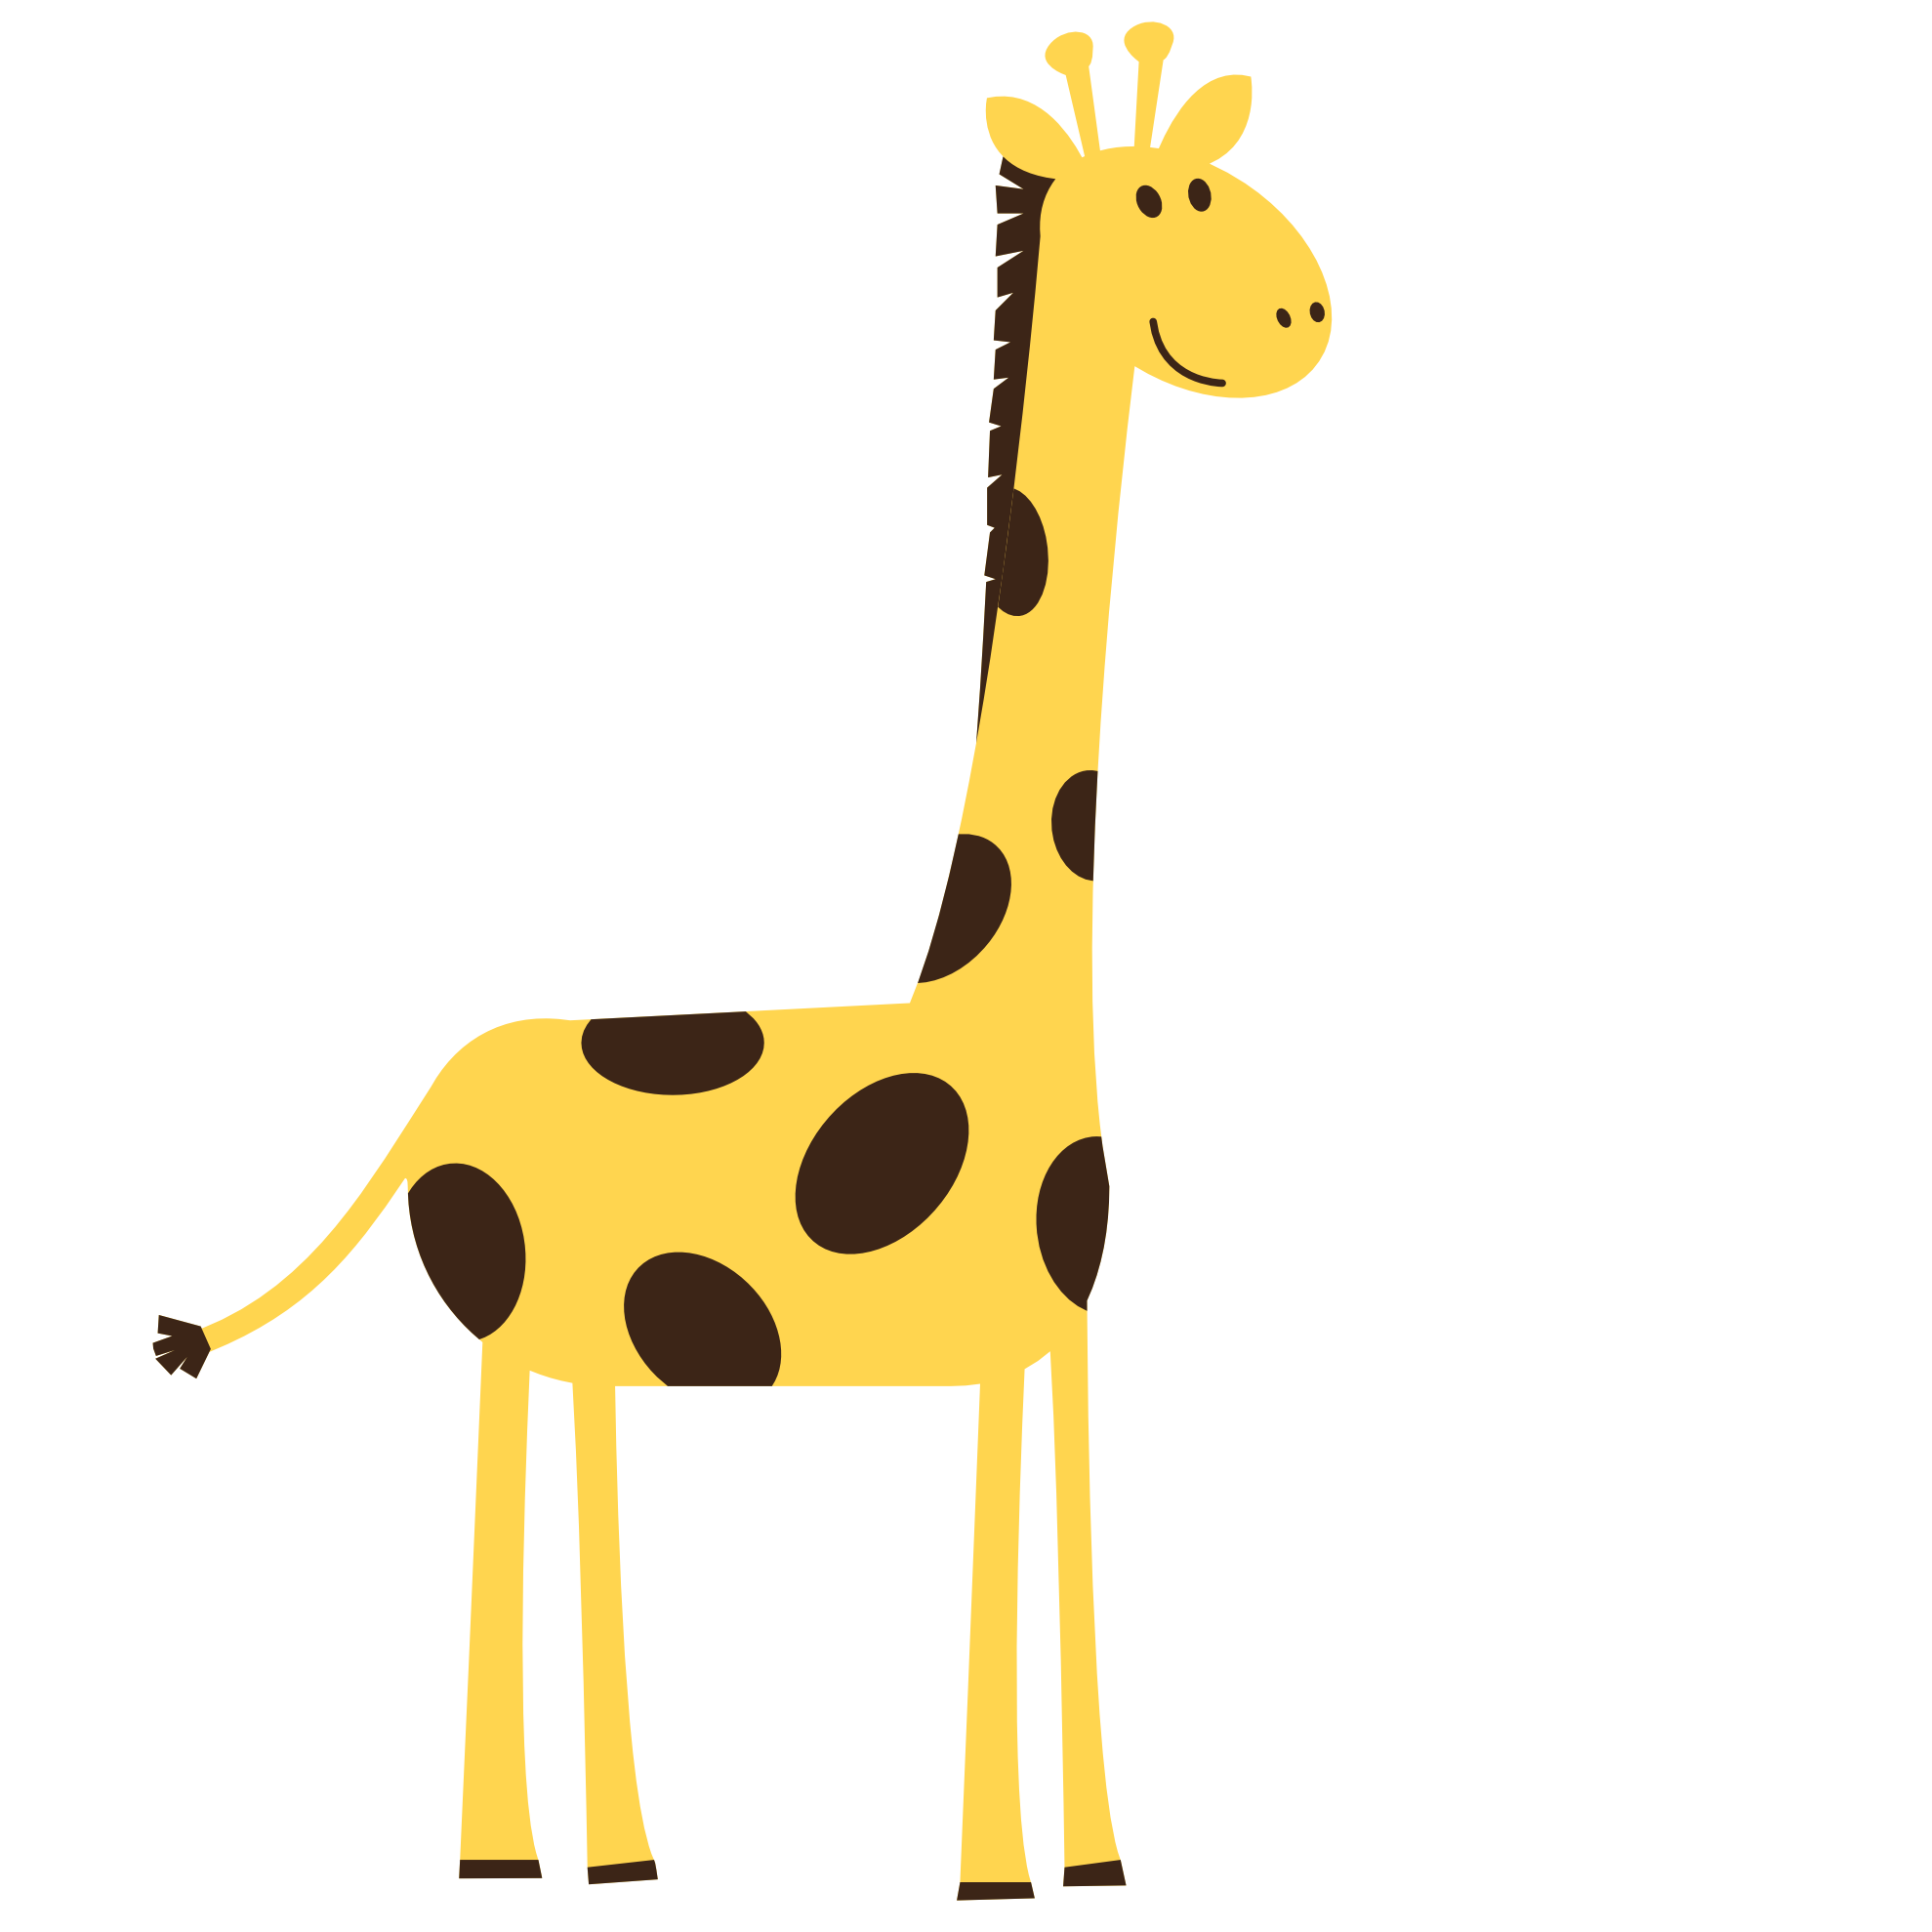 Giraffe Clipart Black And White   Clipart Panda   Free Clipart Images